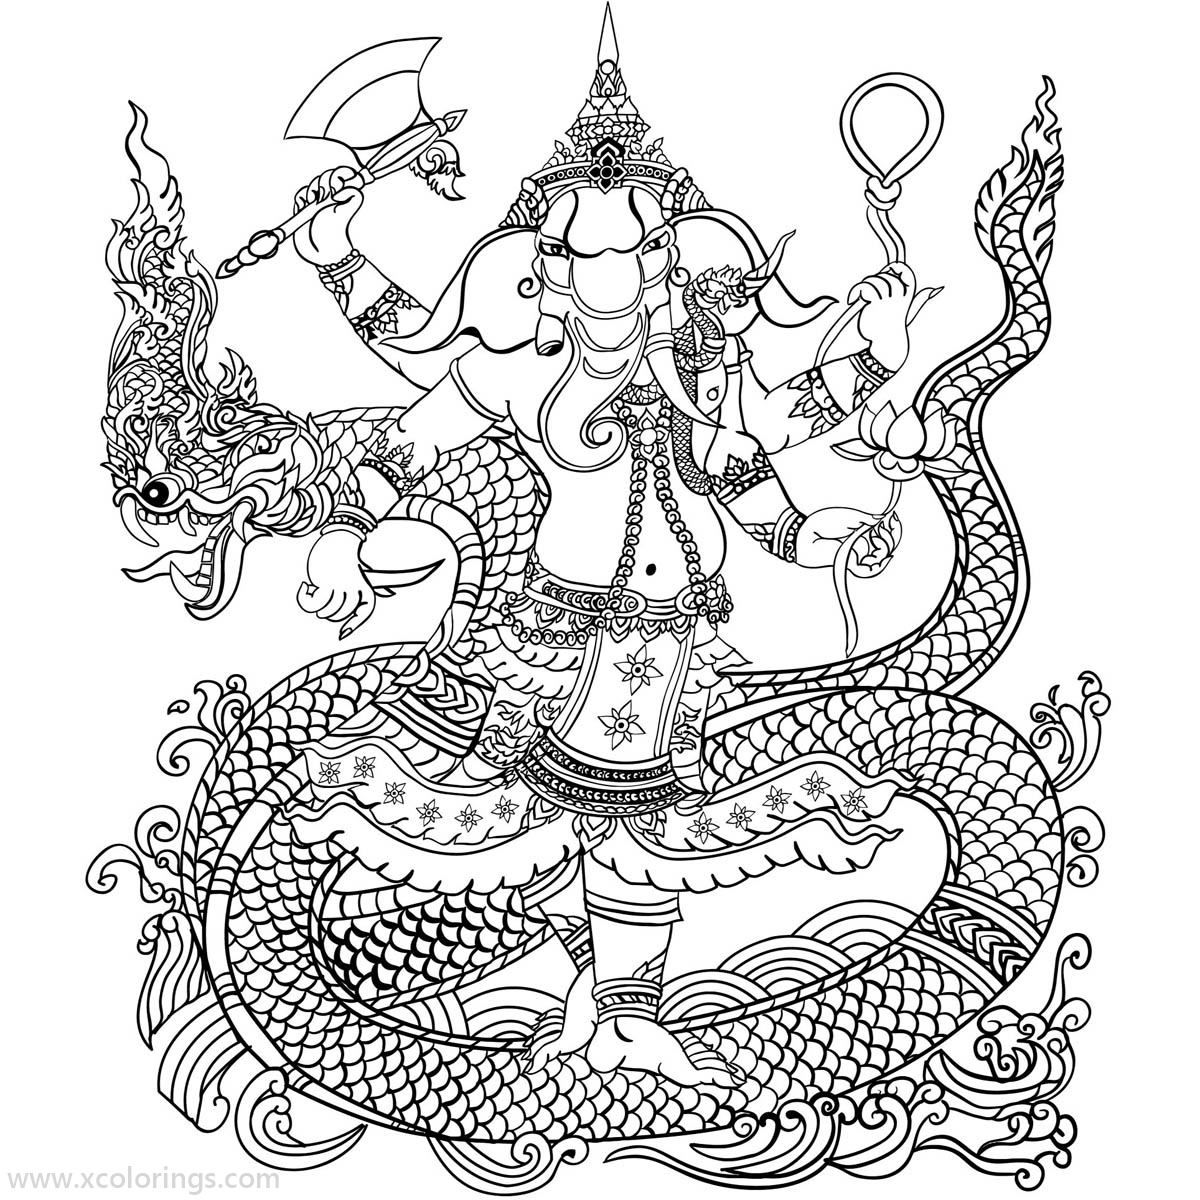 Free Ganesha Coloring Pages For Adults Drawing printable